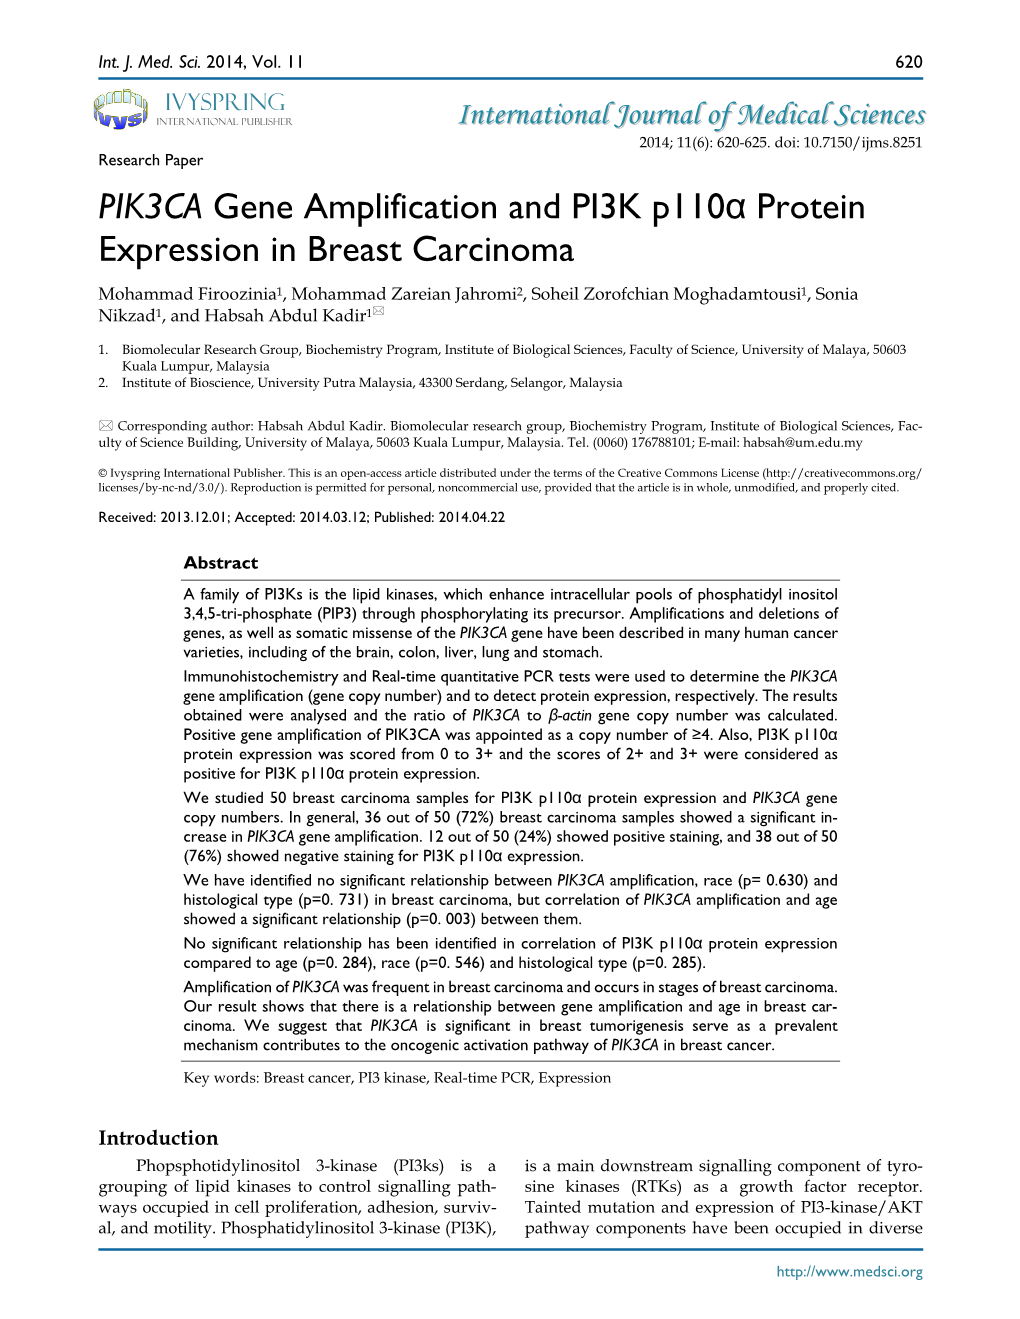 PIK3CA Gene Amplification and PI3K P110α Protein Expression in Breast